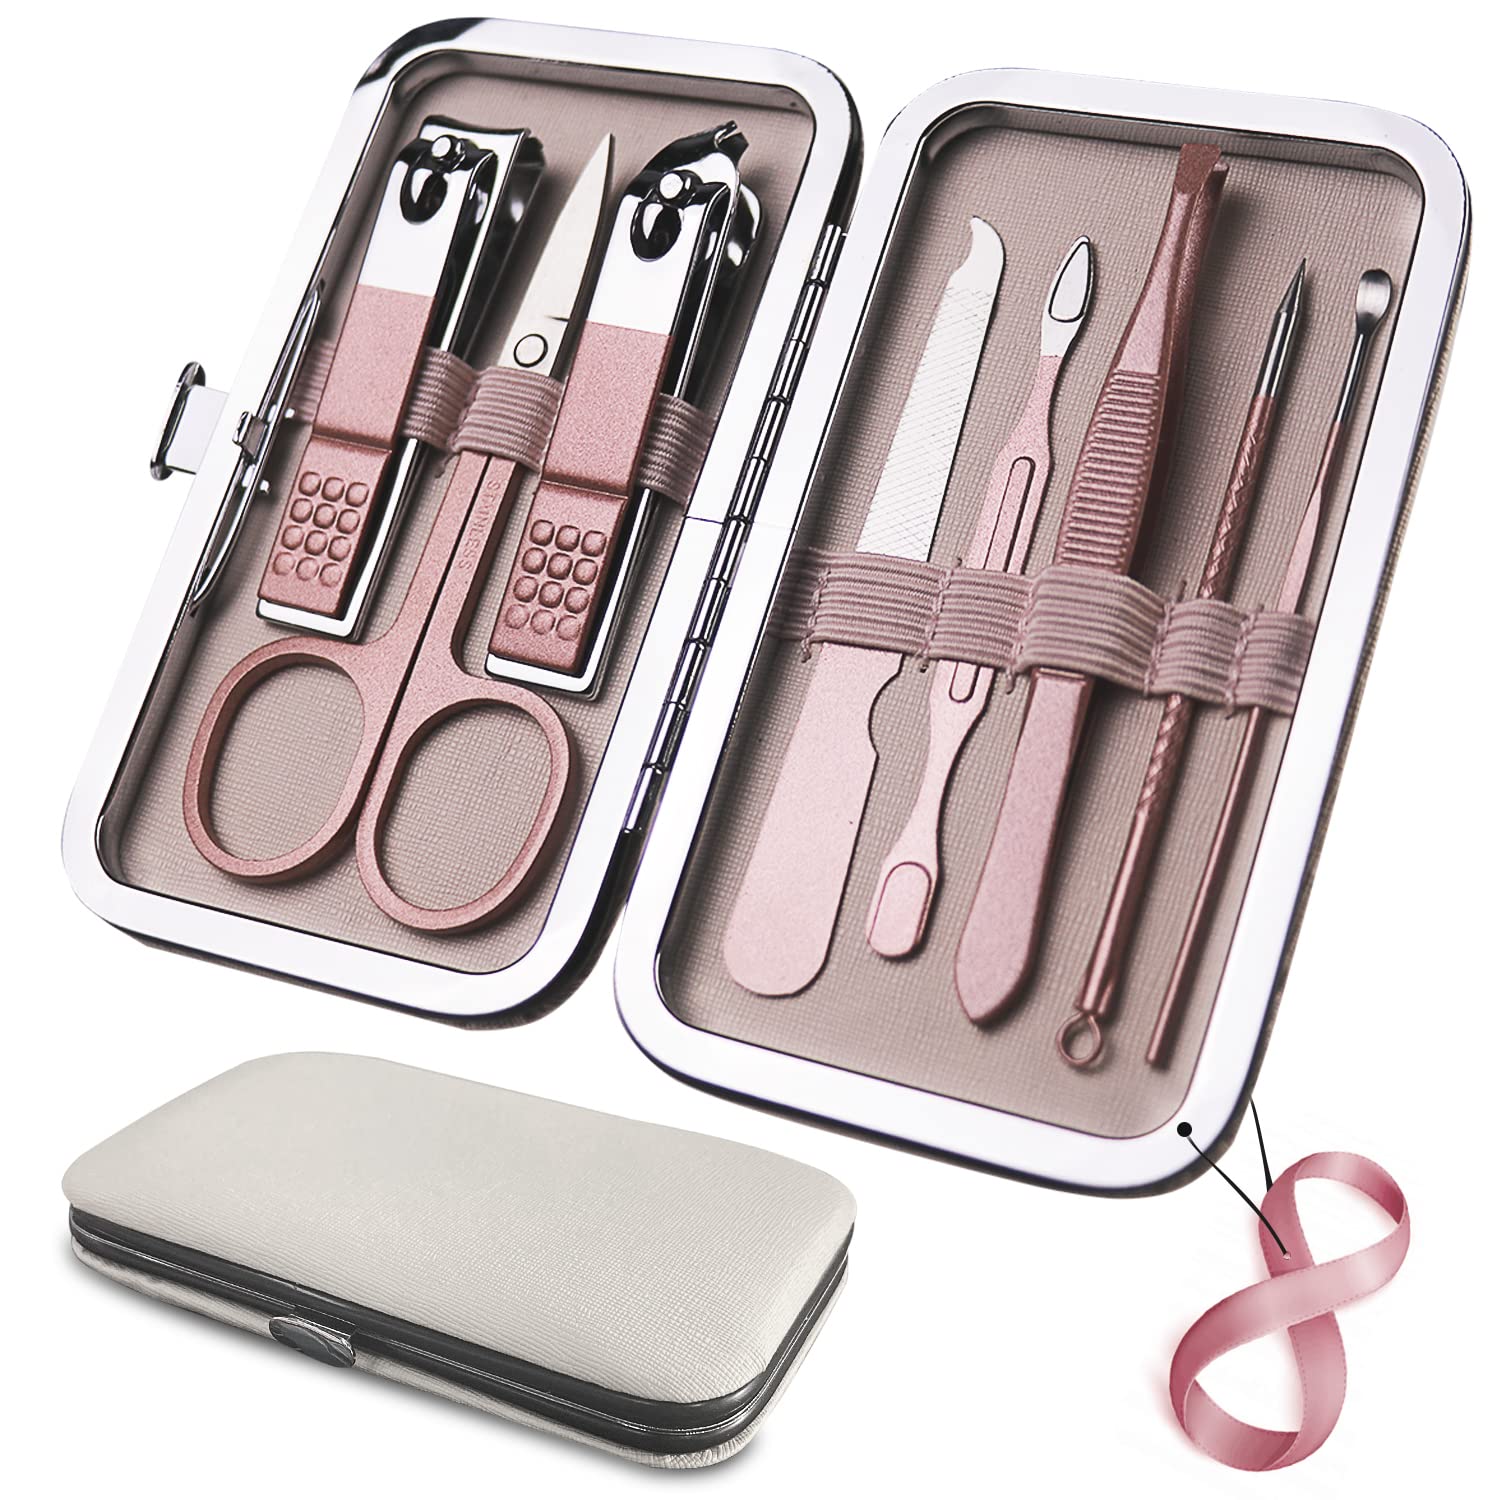 Unique Bargains 1 Set Nail Cutter Set Professional Nail Clipper Kit For  Travel Or Home Silver Tone And Pink Stainless Steel : Target